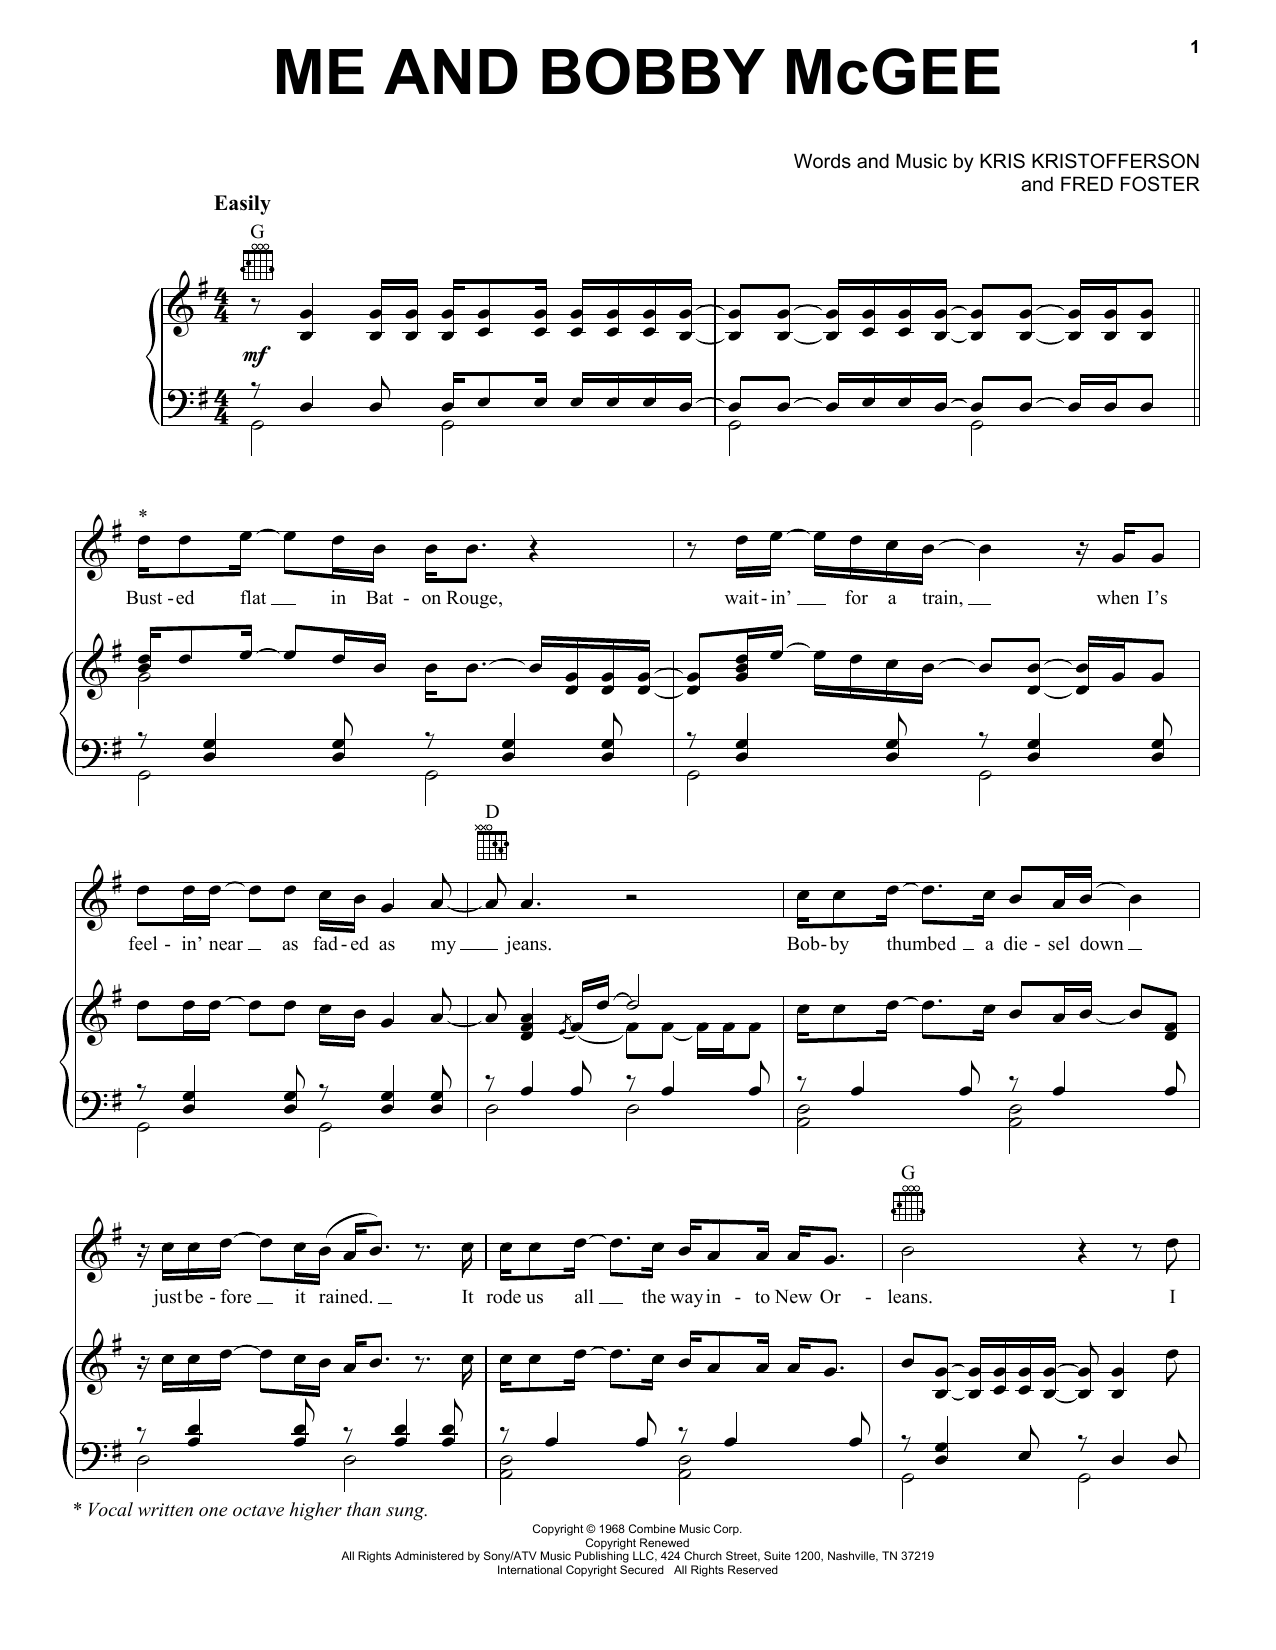 Janis Joplin Me And Bobby McGee sheet music notes and chords. Download Printable PDF.